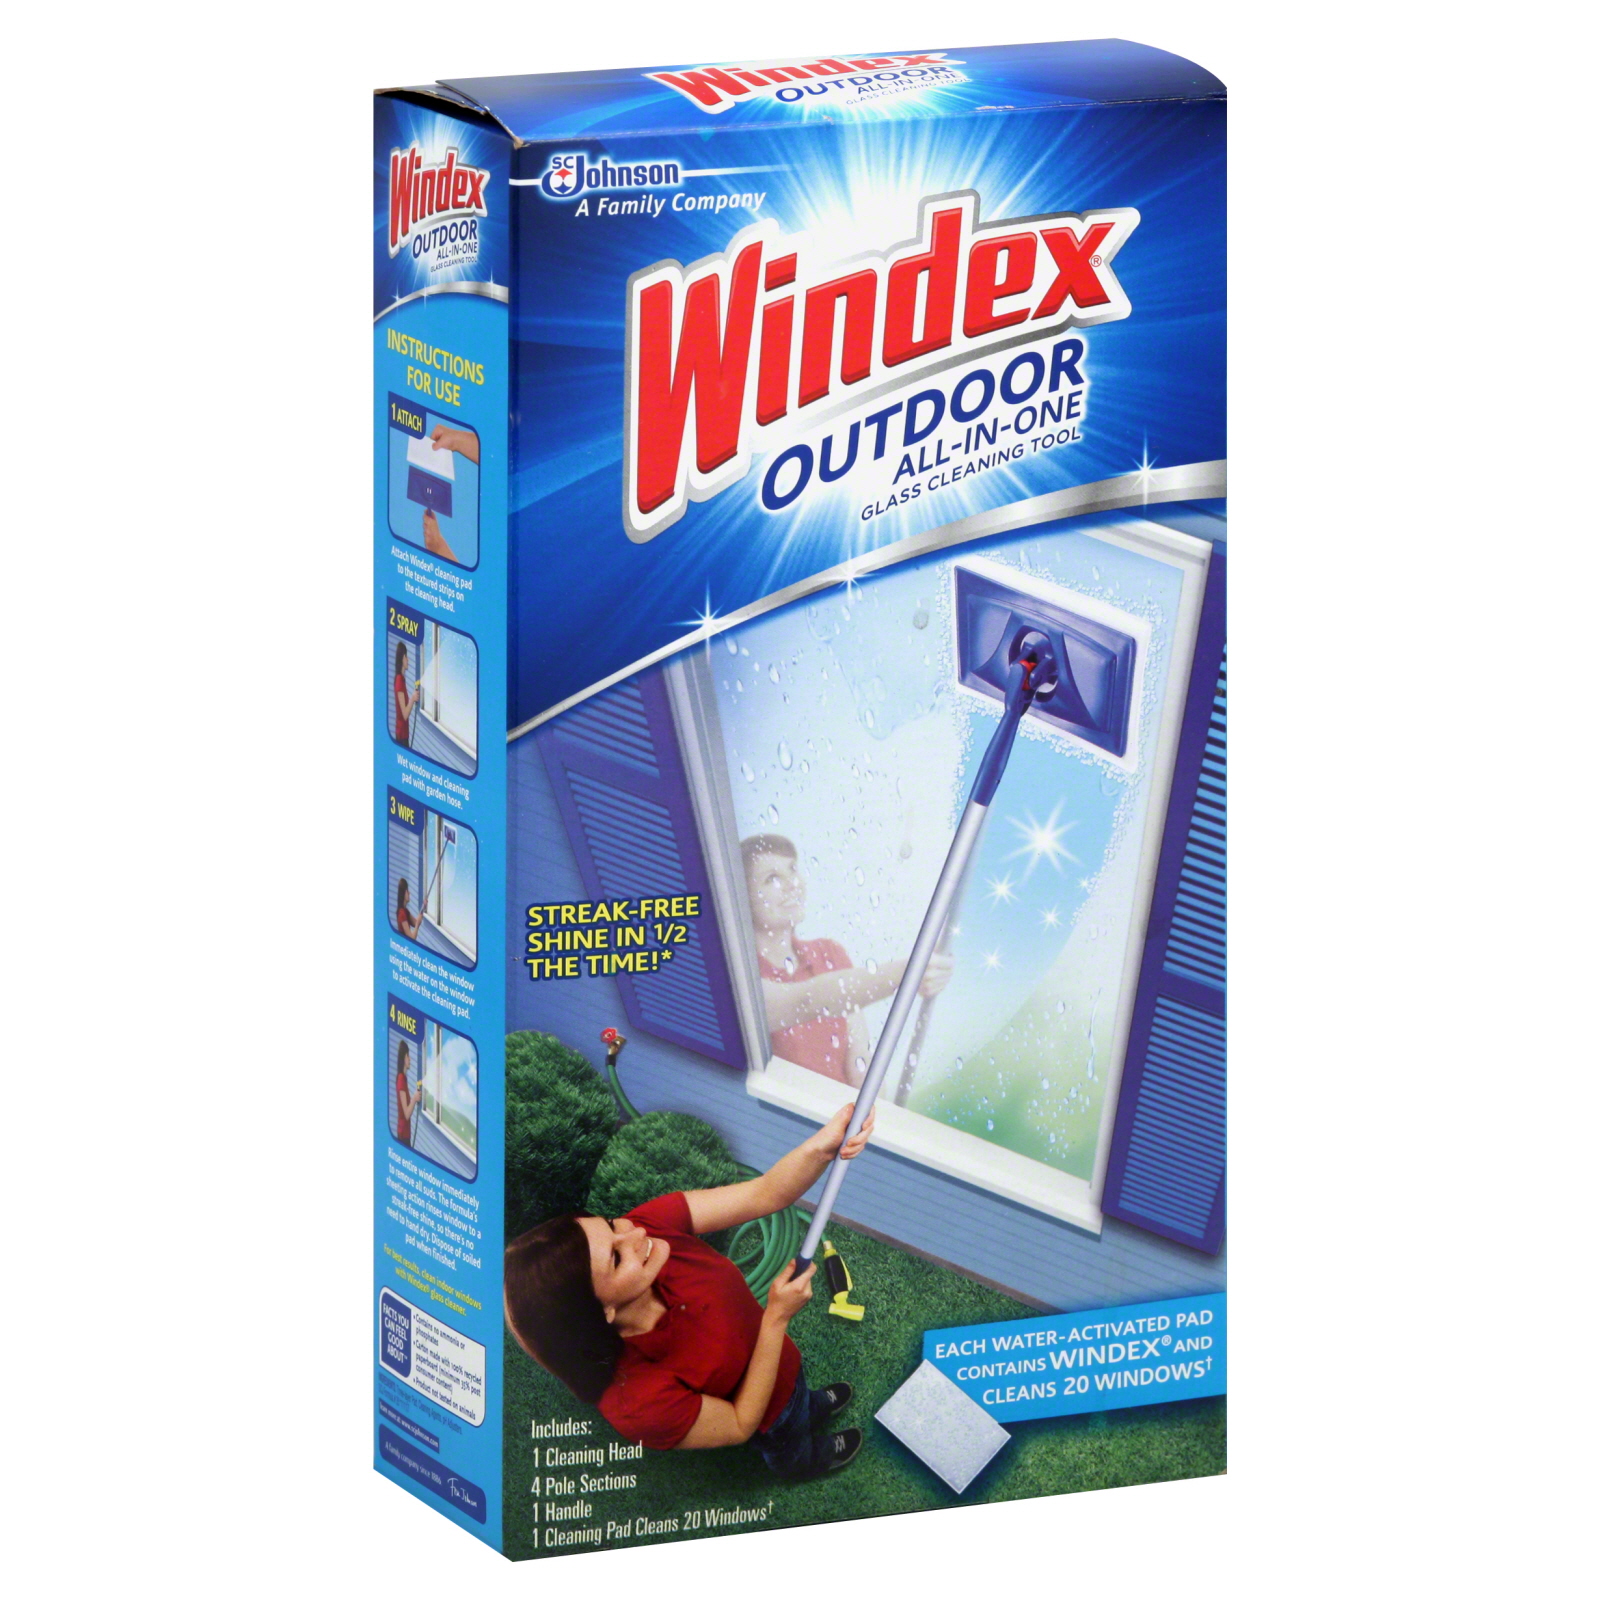 Windex Glass Cleaning Tool, All-In-One, Outdoor, 1 tool